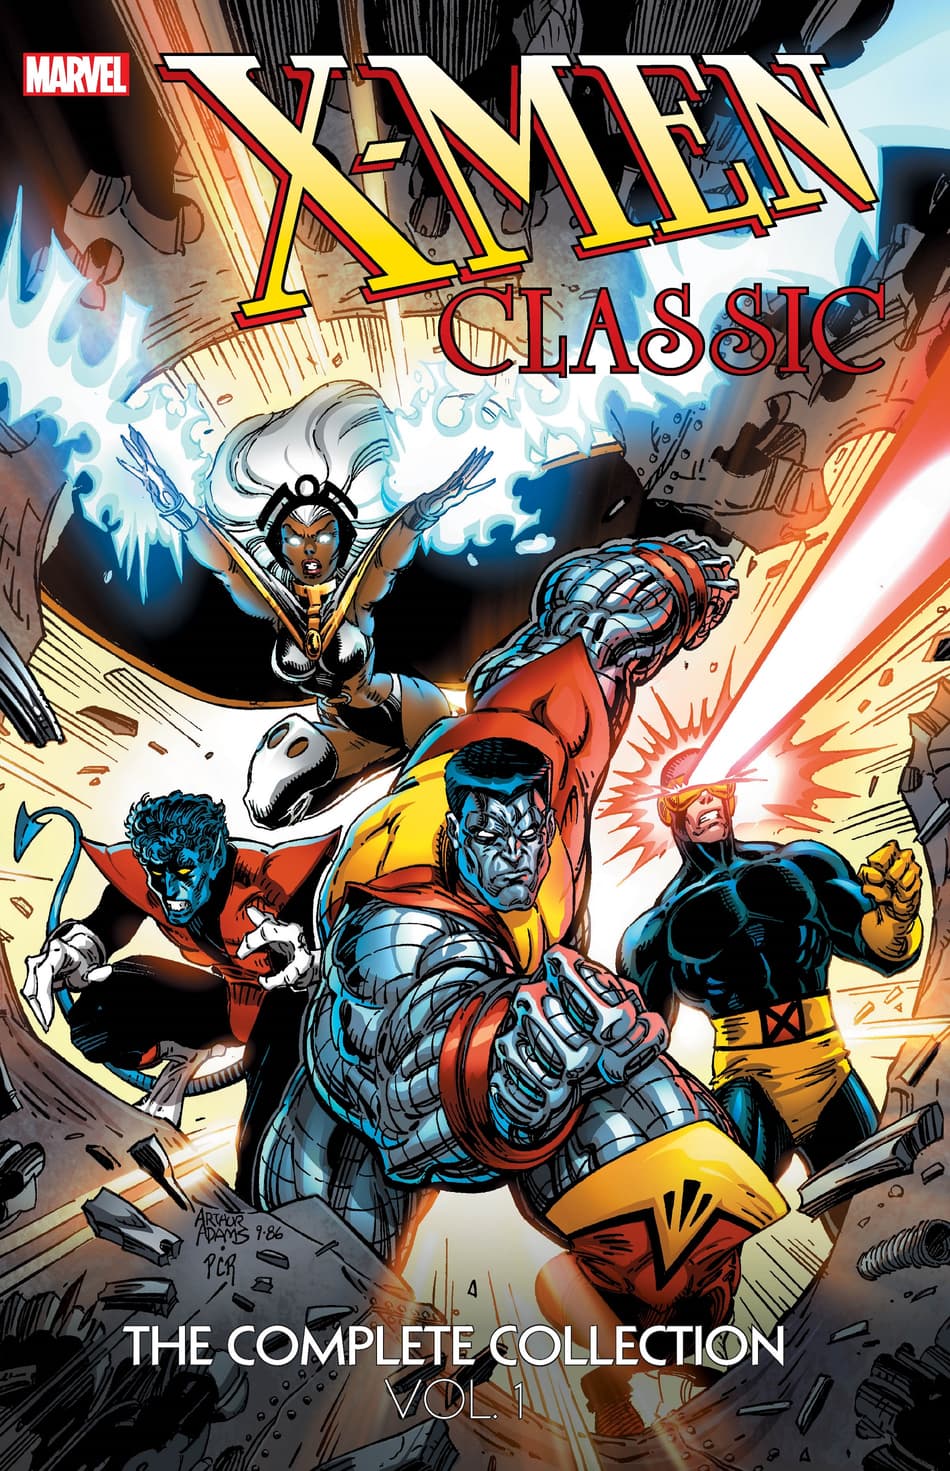 Cover to X-MEN CLASSIC: THE COMPLETE COLLECTION VOL. 1.